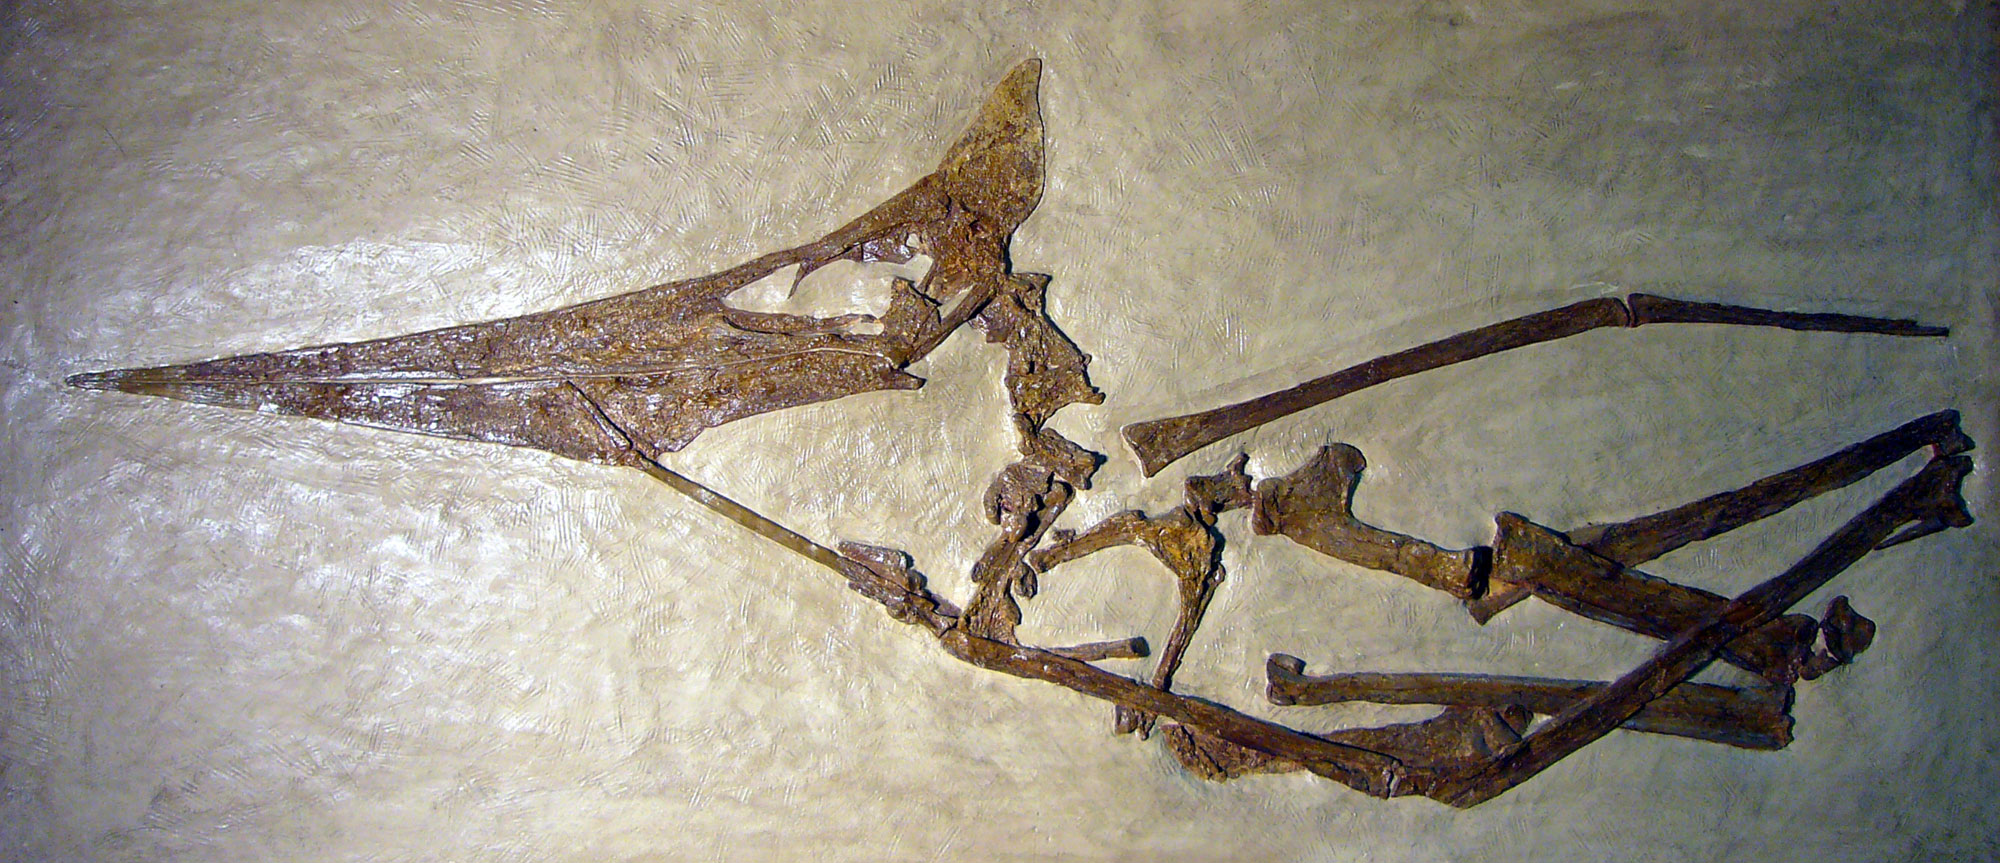 Photo of a specimen of pteranodon, a pterosaur, with a long, beak-like mouth, short crest, long neck, and wing bones.